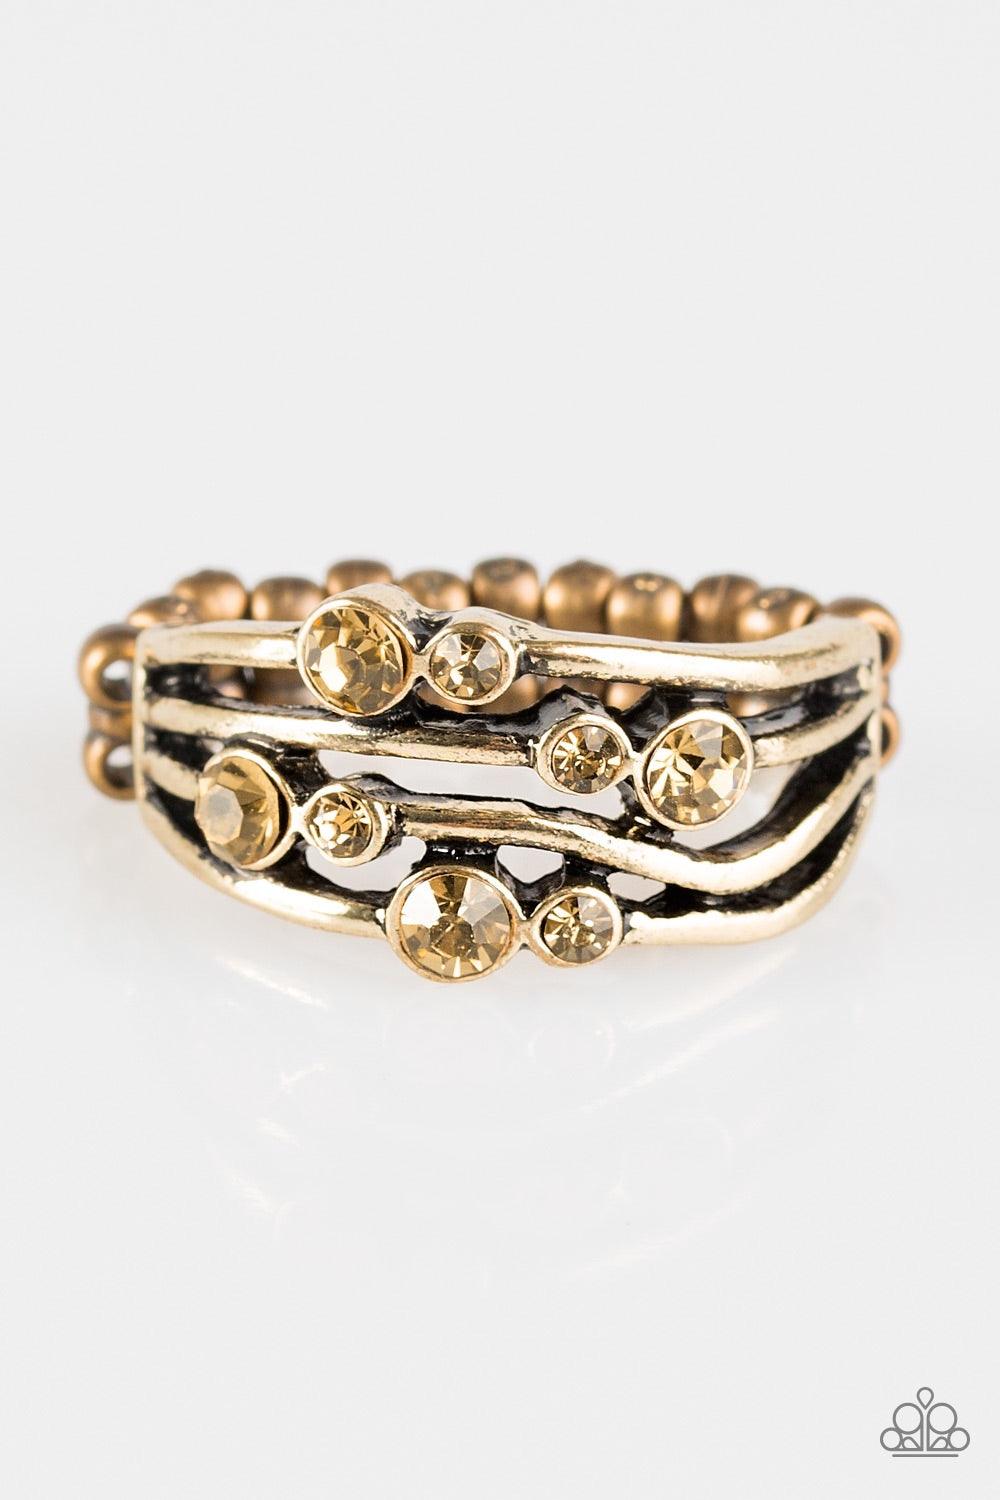 Paparazzi Accessories Welcome to GLEAMland - Brass Glittery topaz rhinestones are sprinkled across wavy brass bars, creating a refined band. Features a dainty stretchy band for a flexible fit. Jewelry